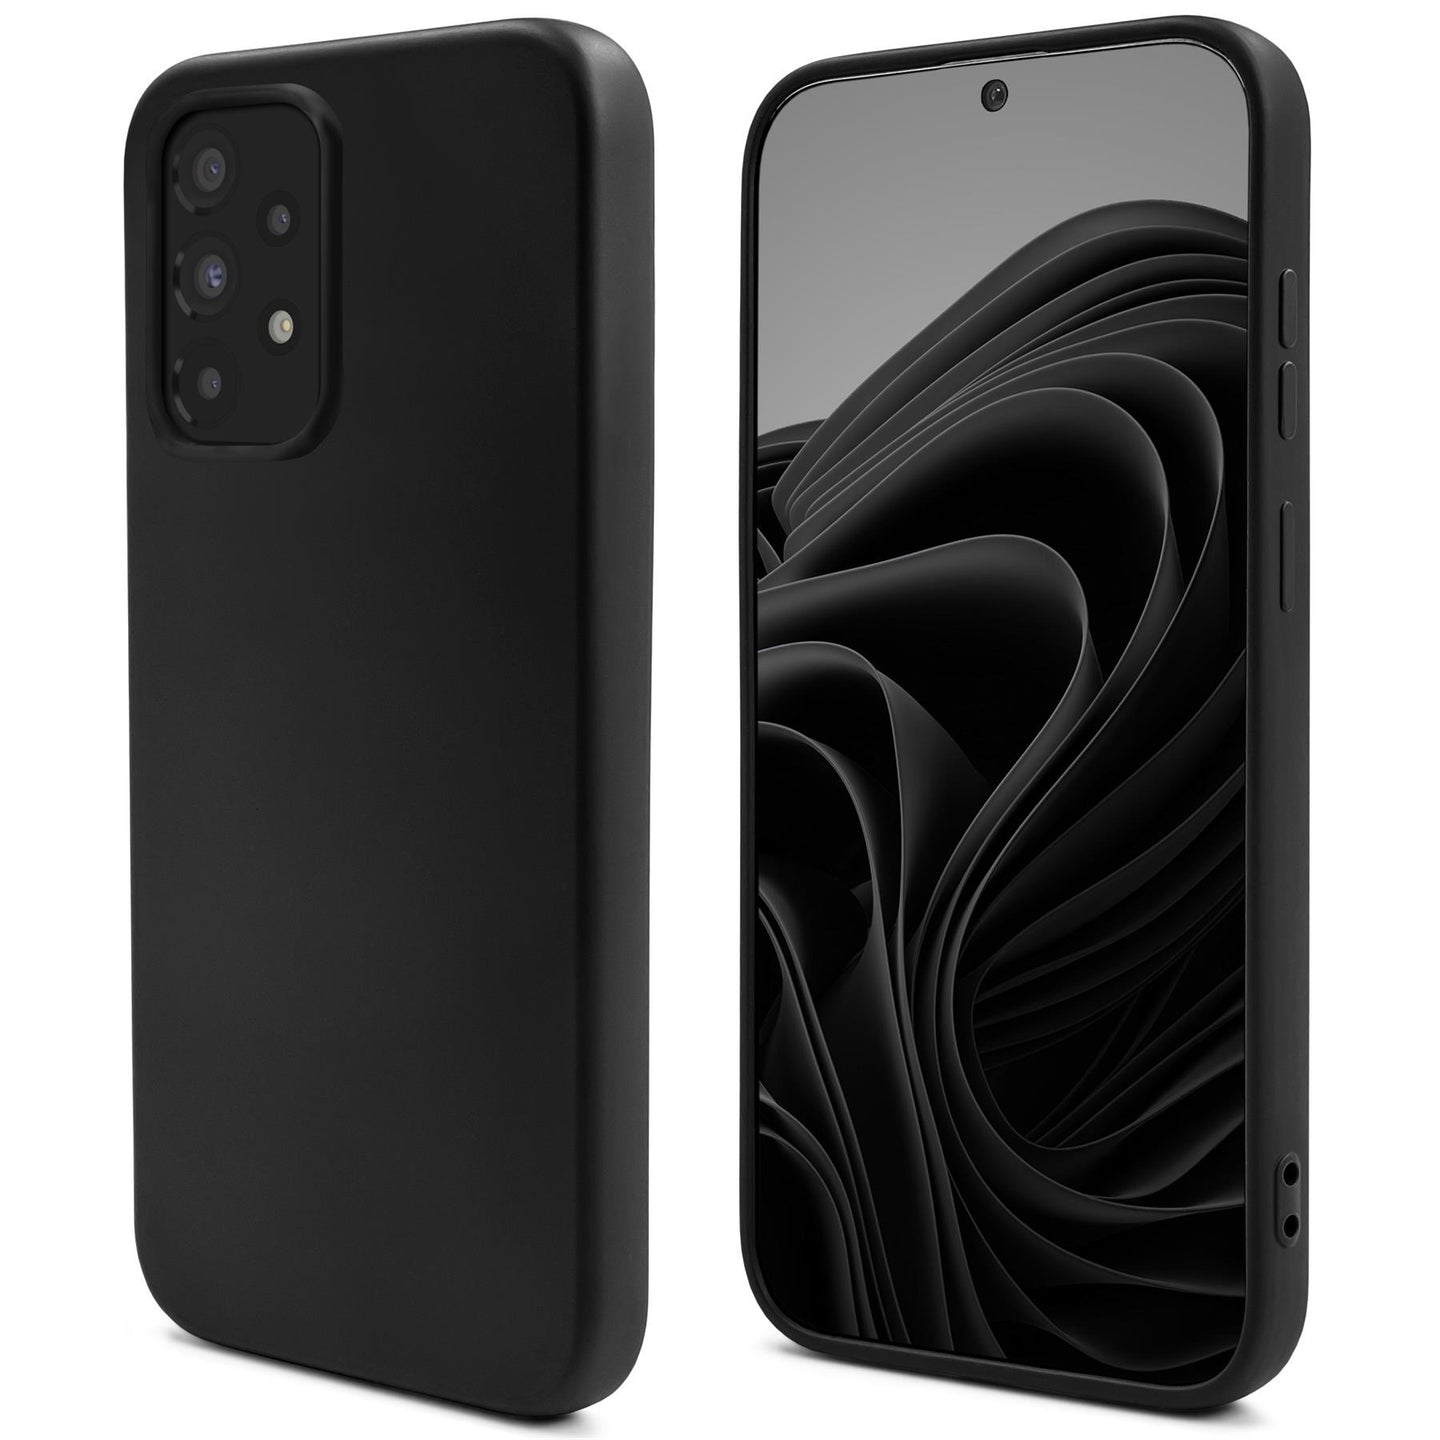 Moozy Lifestyle. Silicone Case for Samsung A33 5G, Black - Liquid Silicone Lightweight Cover with Matte Finish and Soft Microfiber Lining, Premium Silicone Case